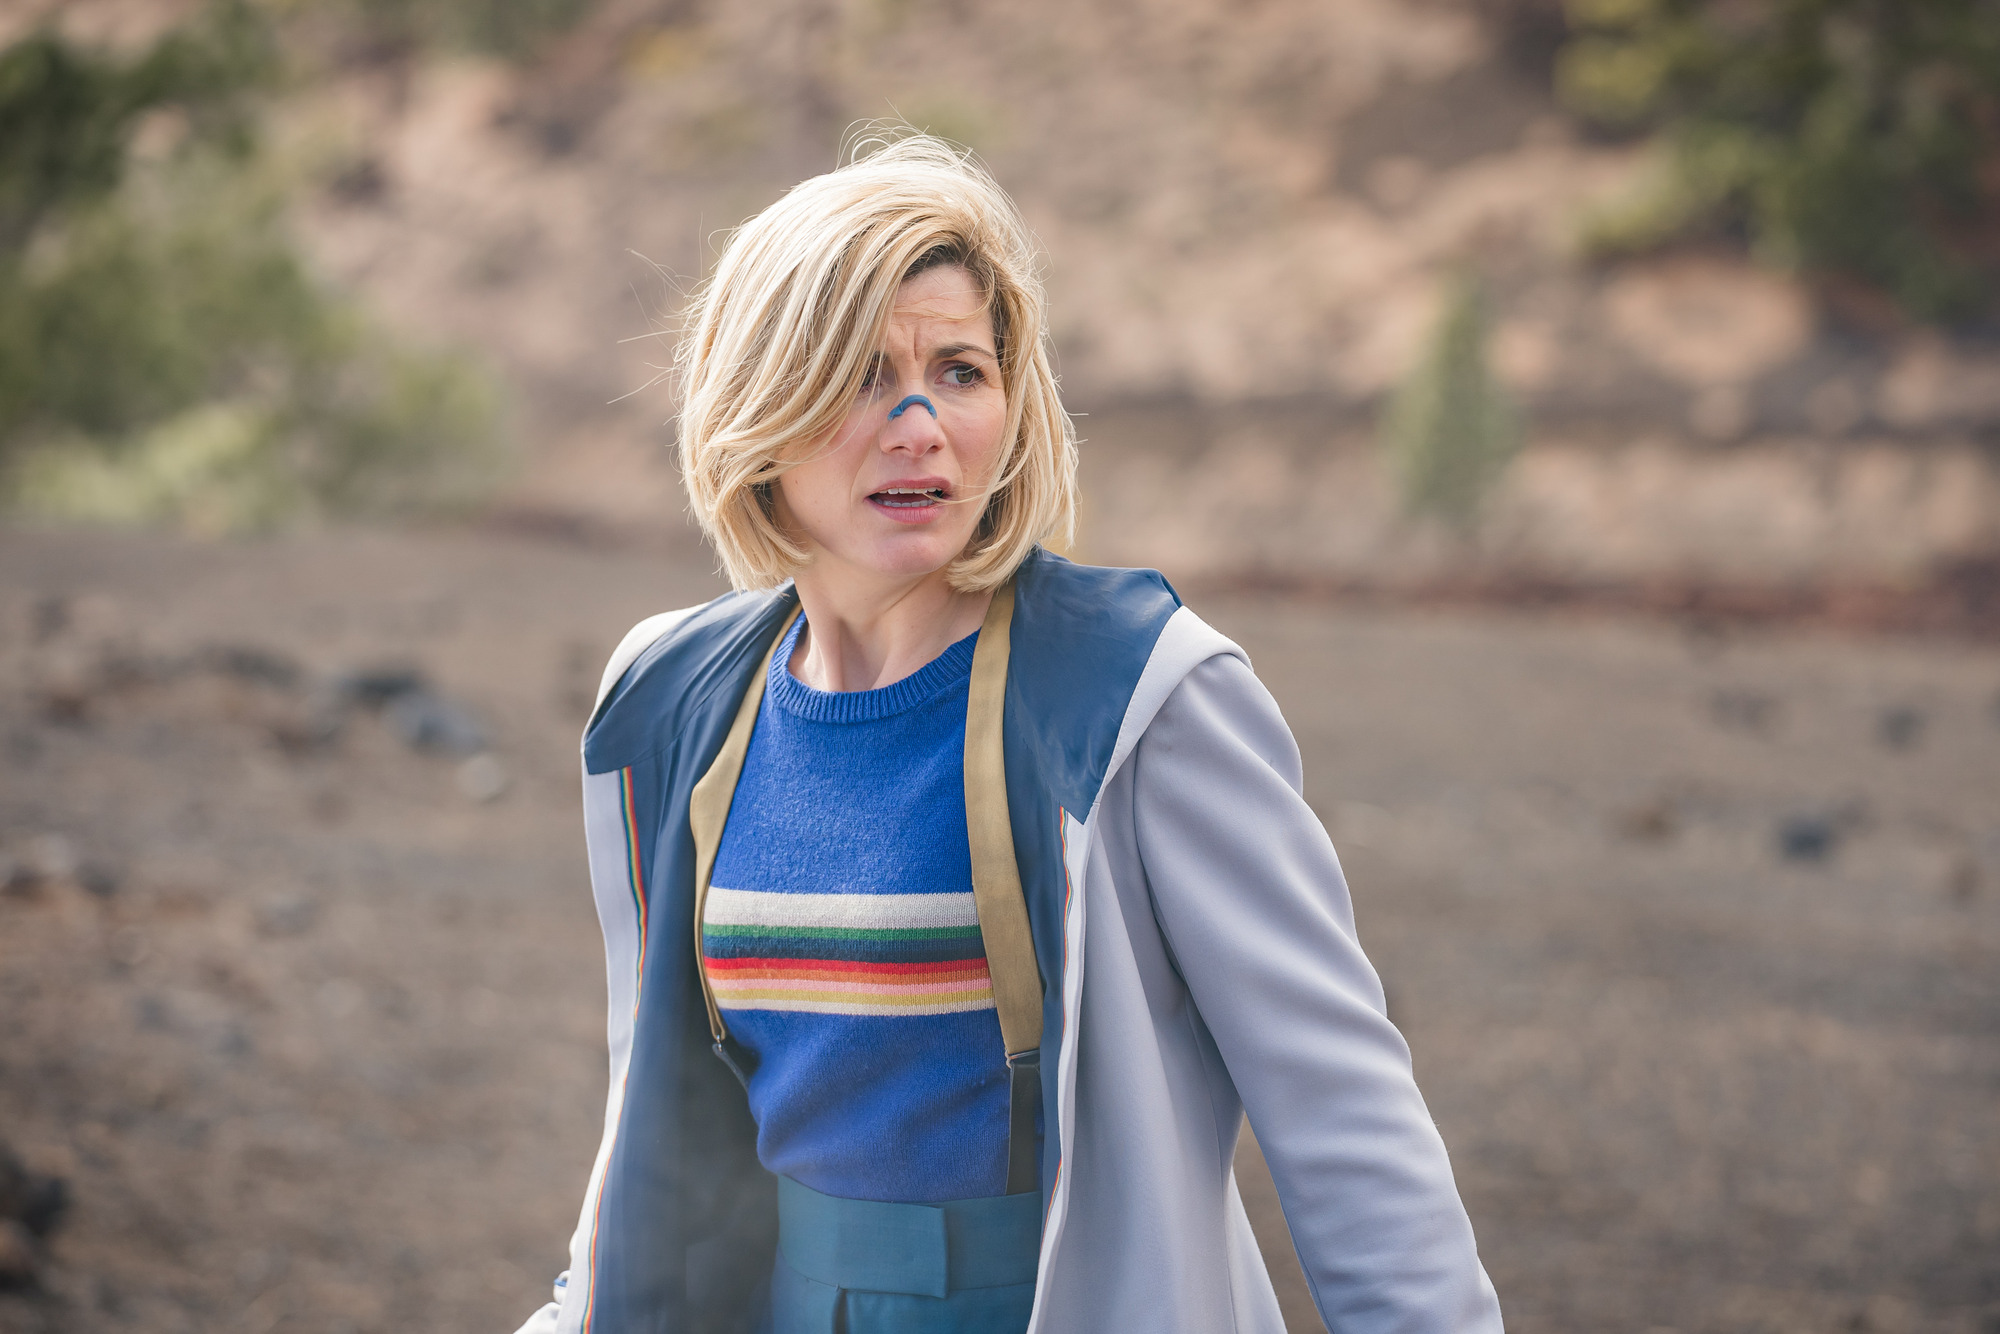 Doctor Who Season 13 - release date, cast, plot, trailer, and more | ollimag